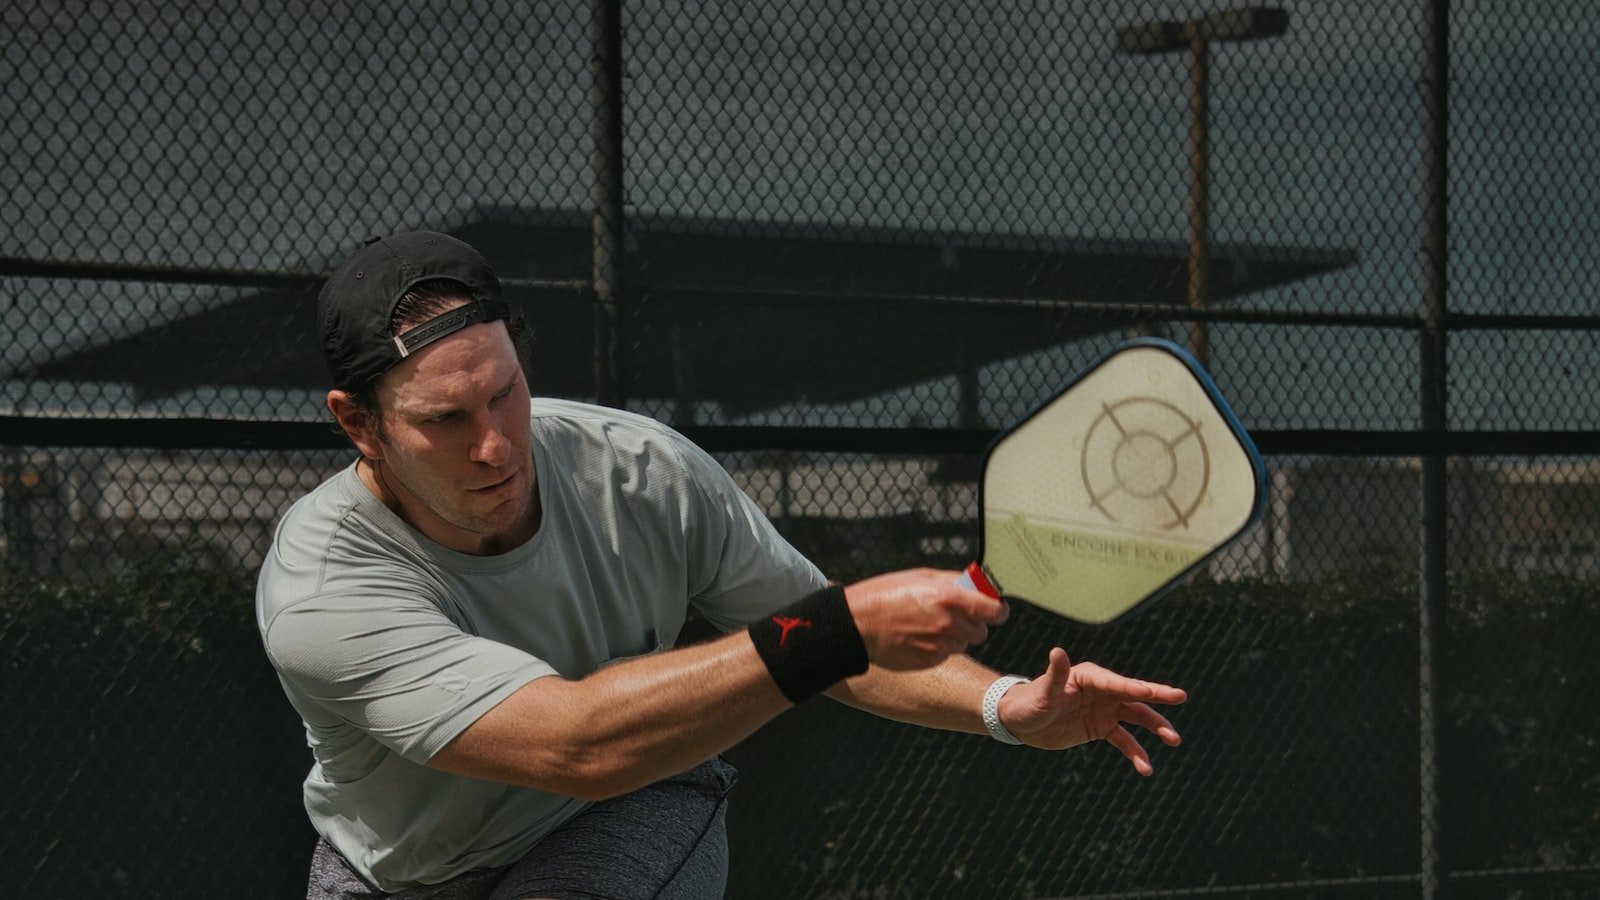 Paddle Selection 101: Pickleball’s Essential Guide